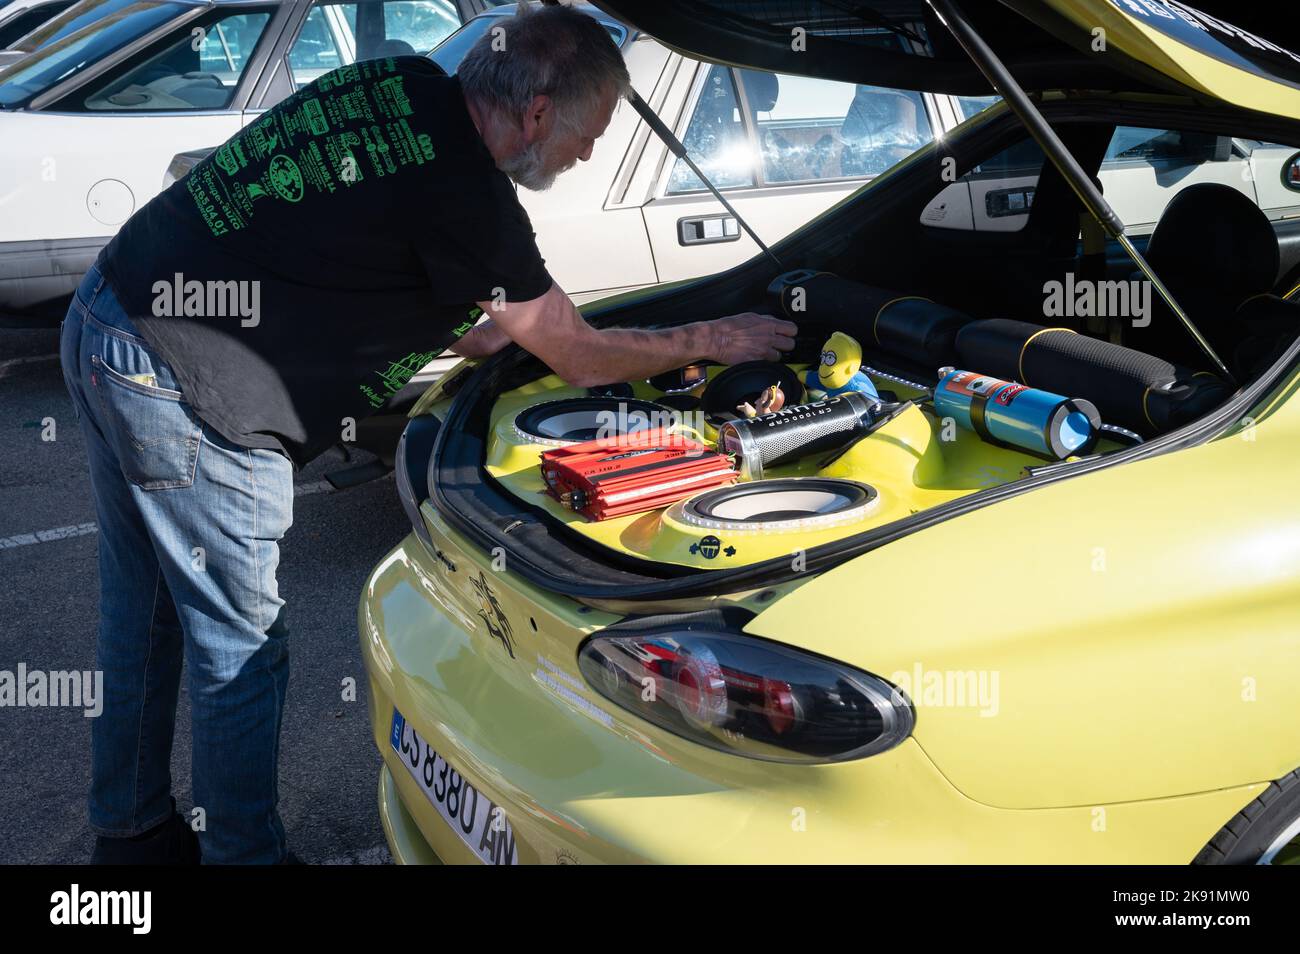 A man working on a tuned yellow Hyundai Coupe with stereo and toys in the trunk Stock Photo